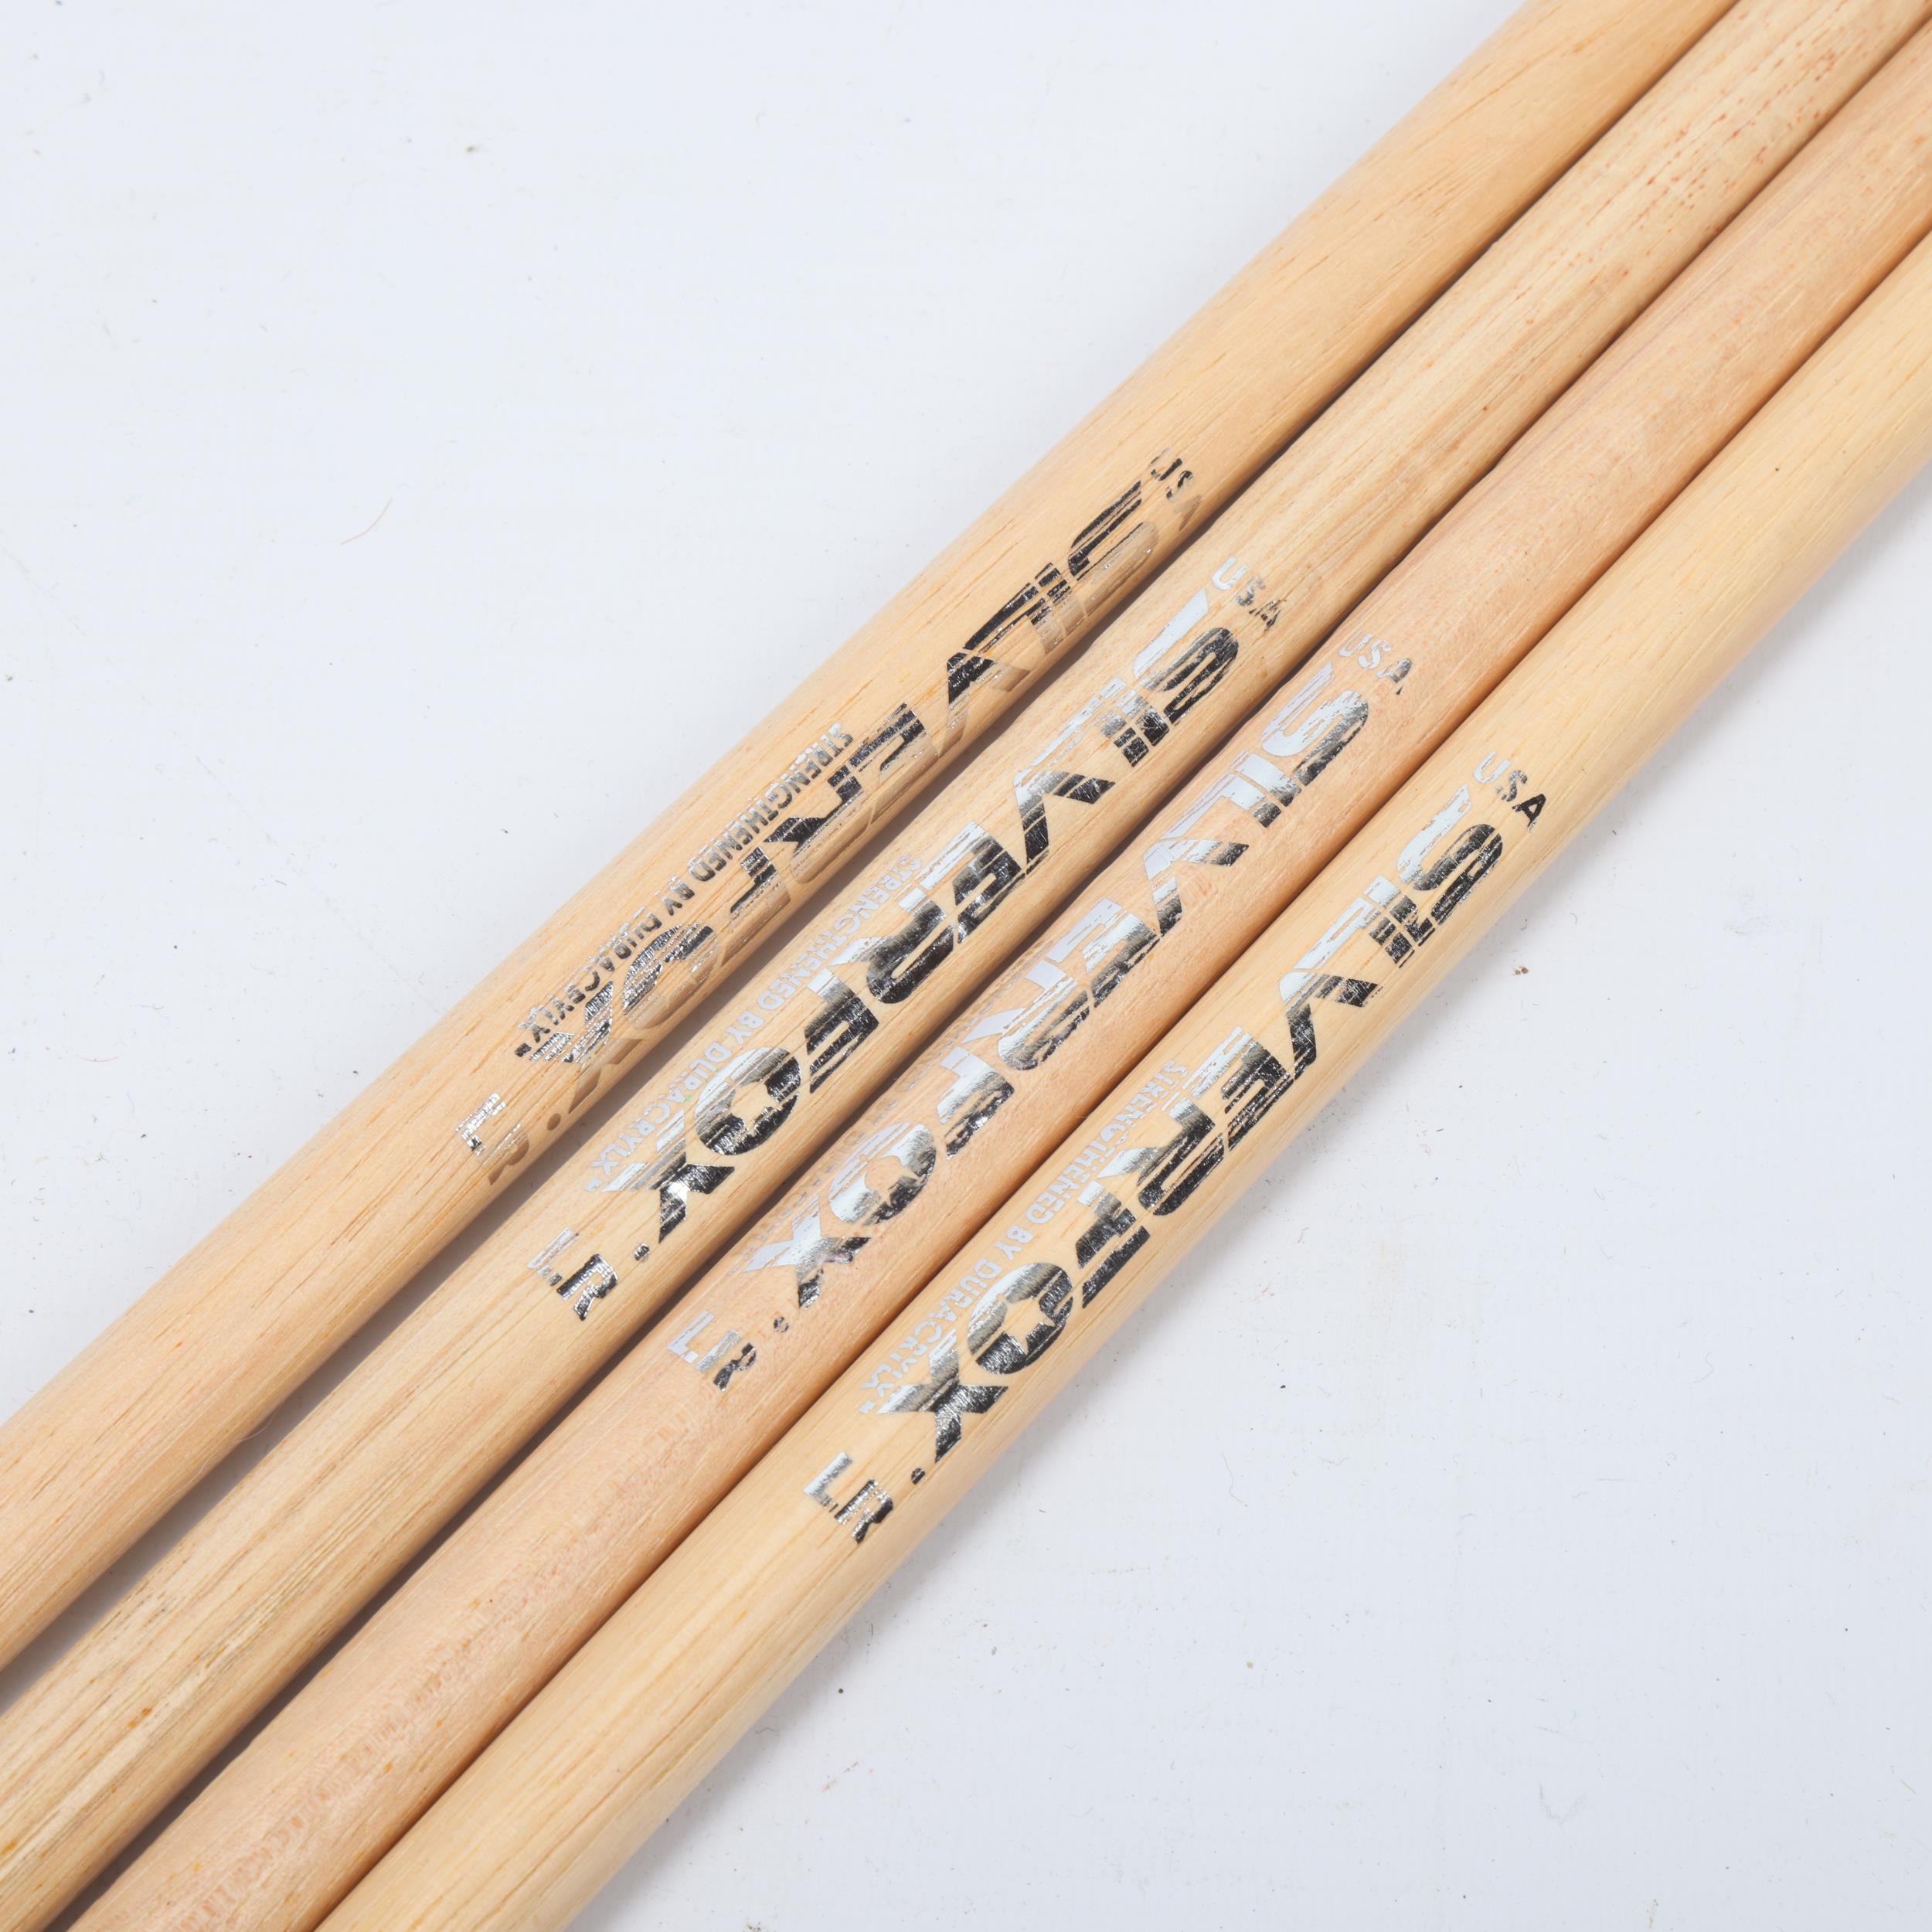 Four USED SILVERFOX LR Hickory DRUMSTICKS belonging to MITCH MITCHELL. - Image 2 of 3